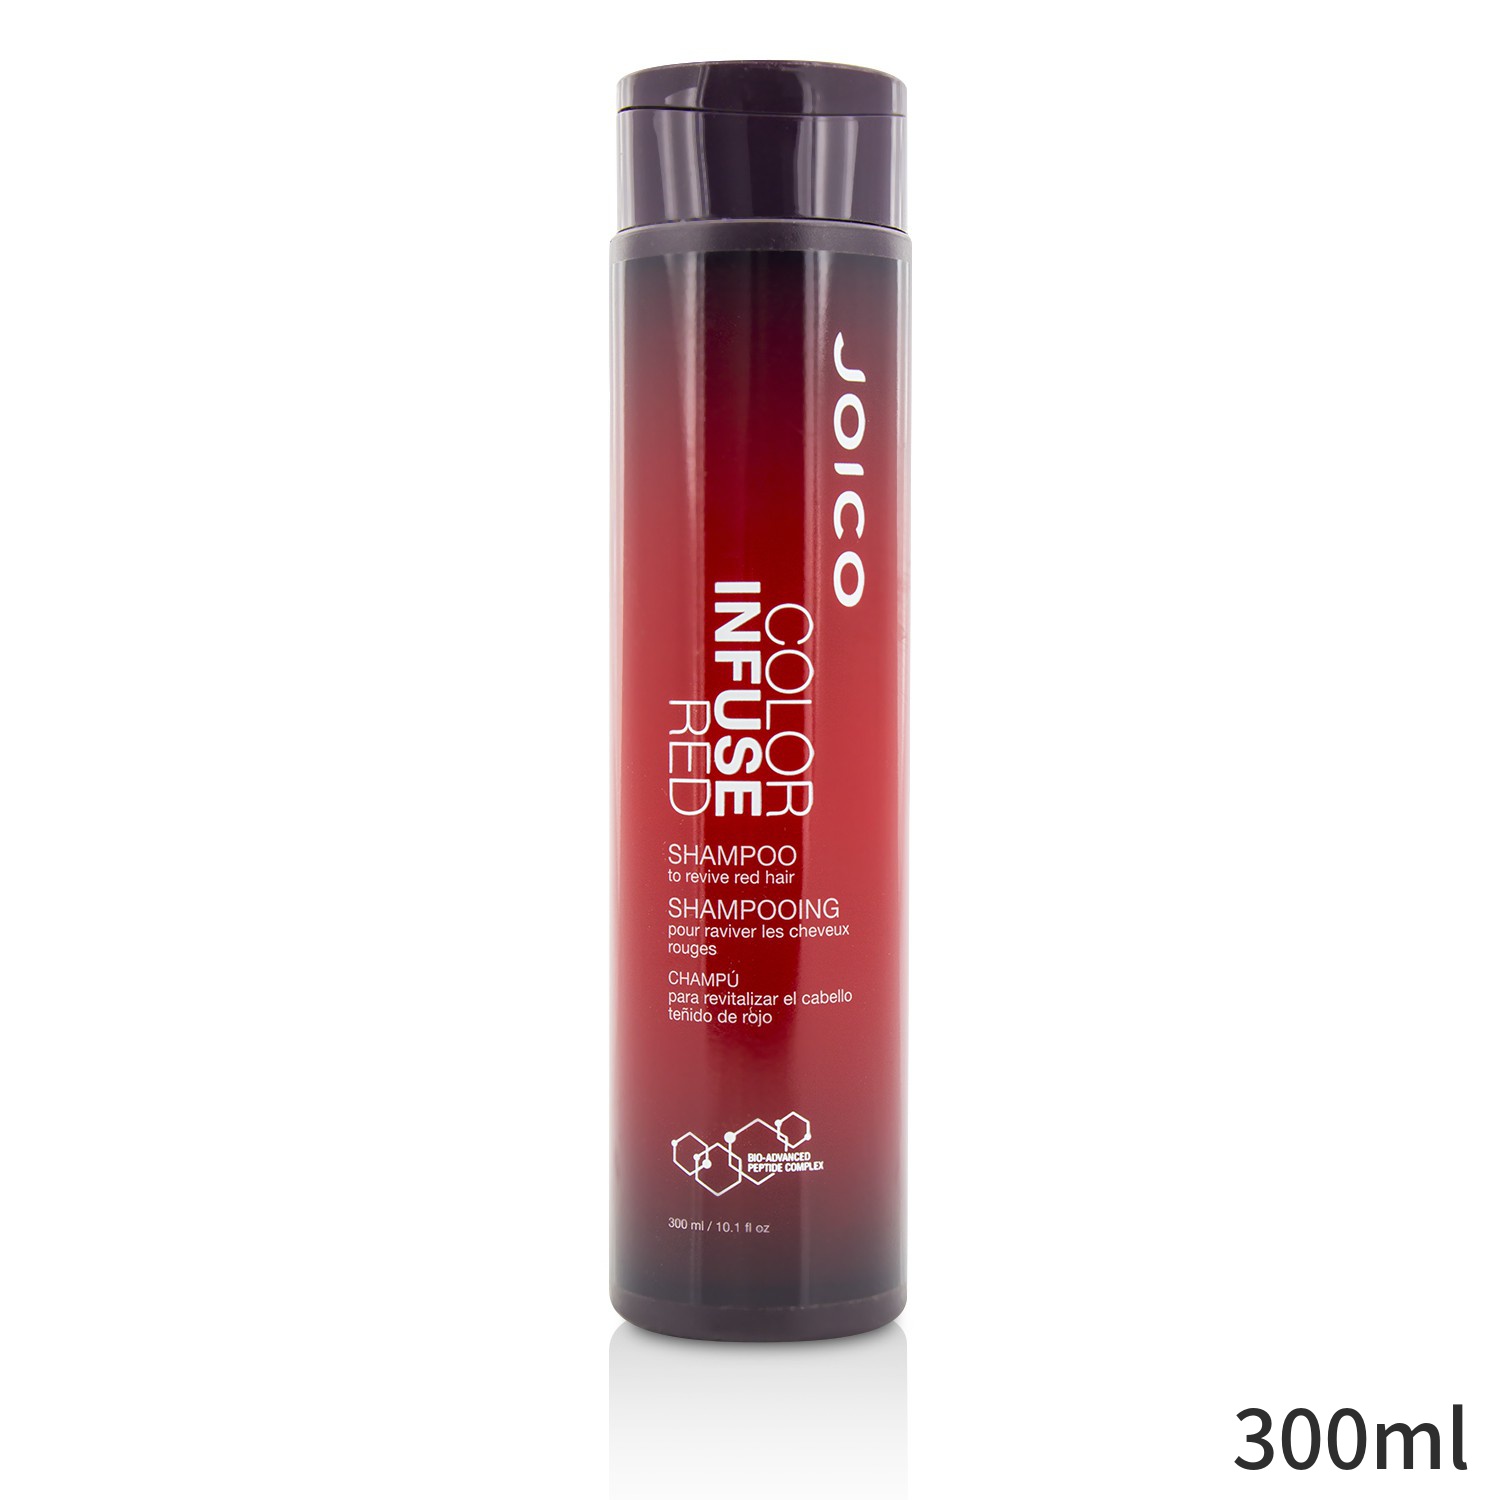 WEB限定 上等 ジョイコ シャンプー コスメ 化粧品 海外直送 Joico カラー インヒューズ レッド To Revive Red Hair 300ml ヘアケア 母の日 プレゼント ギフト 2022 人気 ブランド huppelaud.ee huppelaud.ee